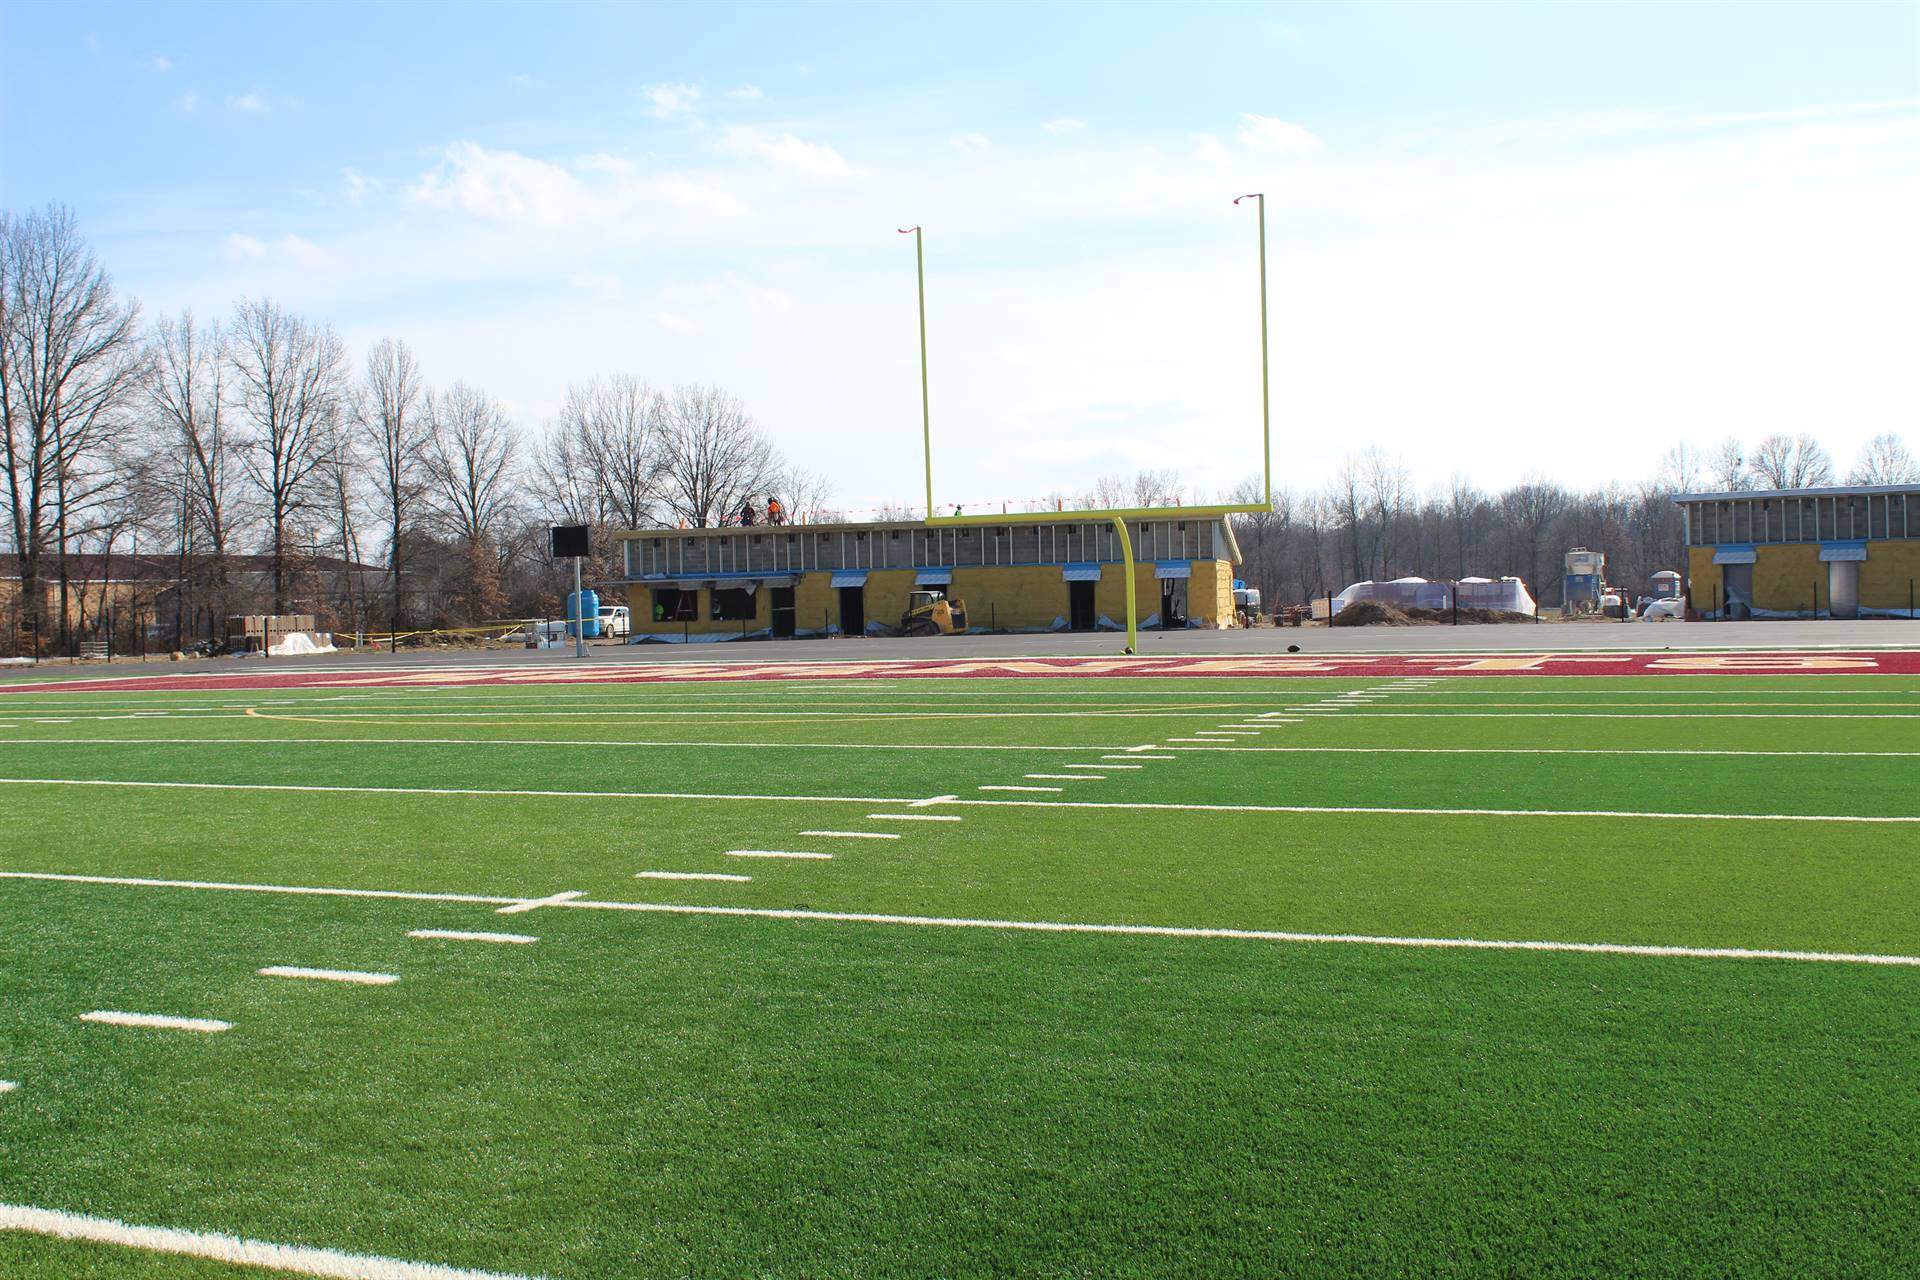 Constriction of the athletic complex